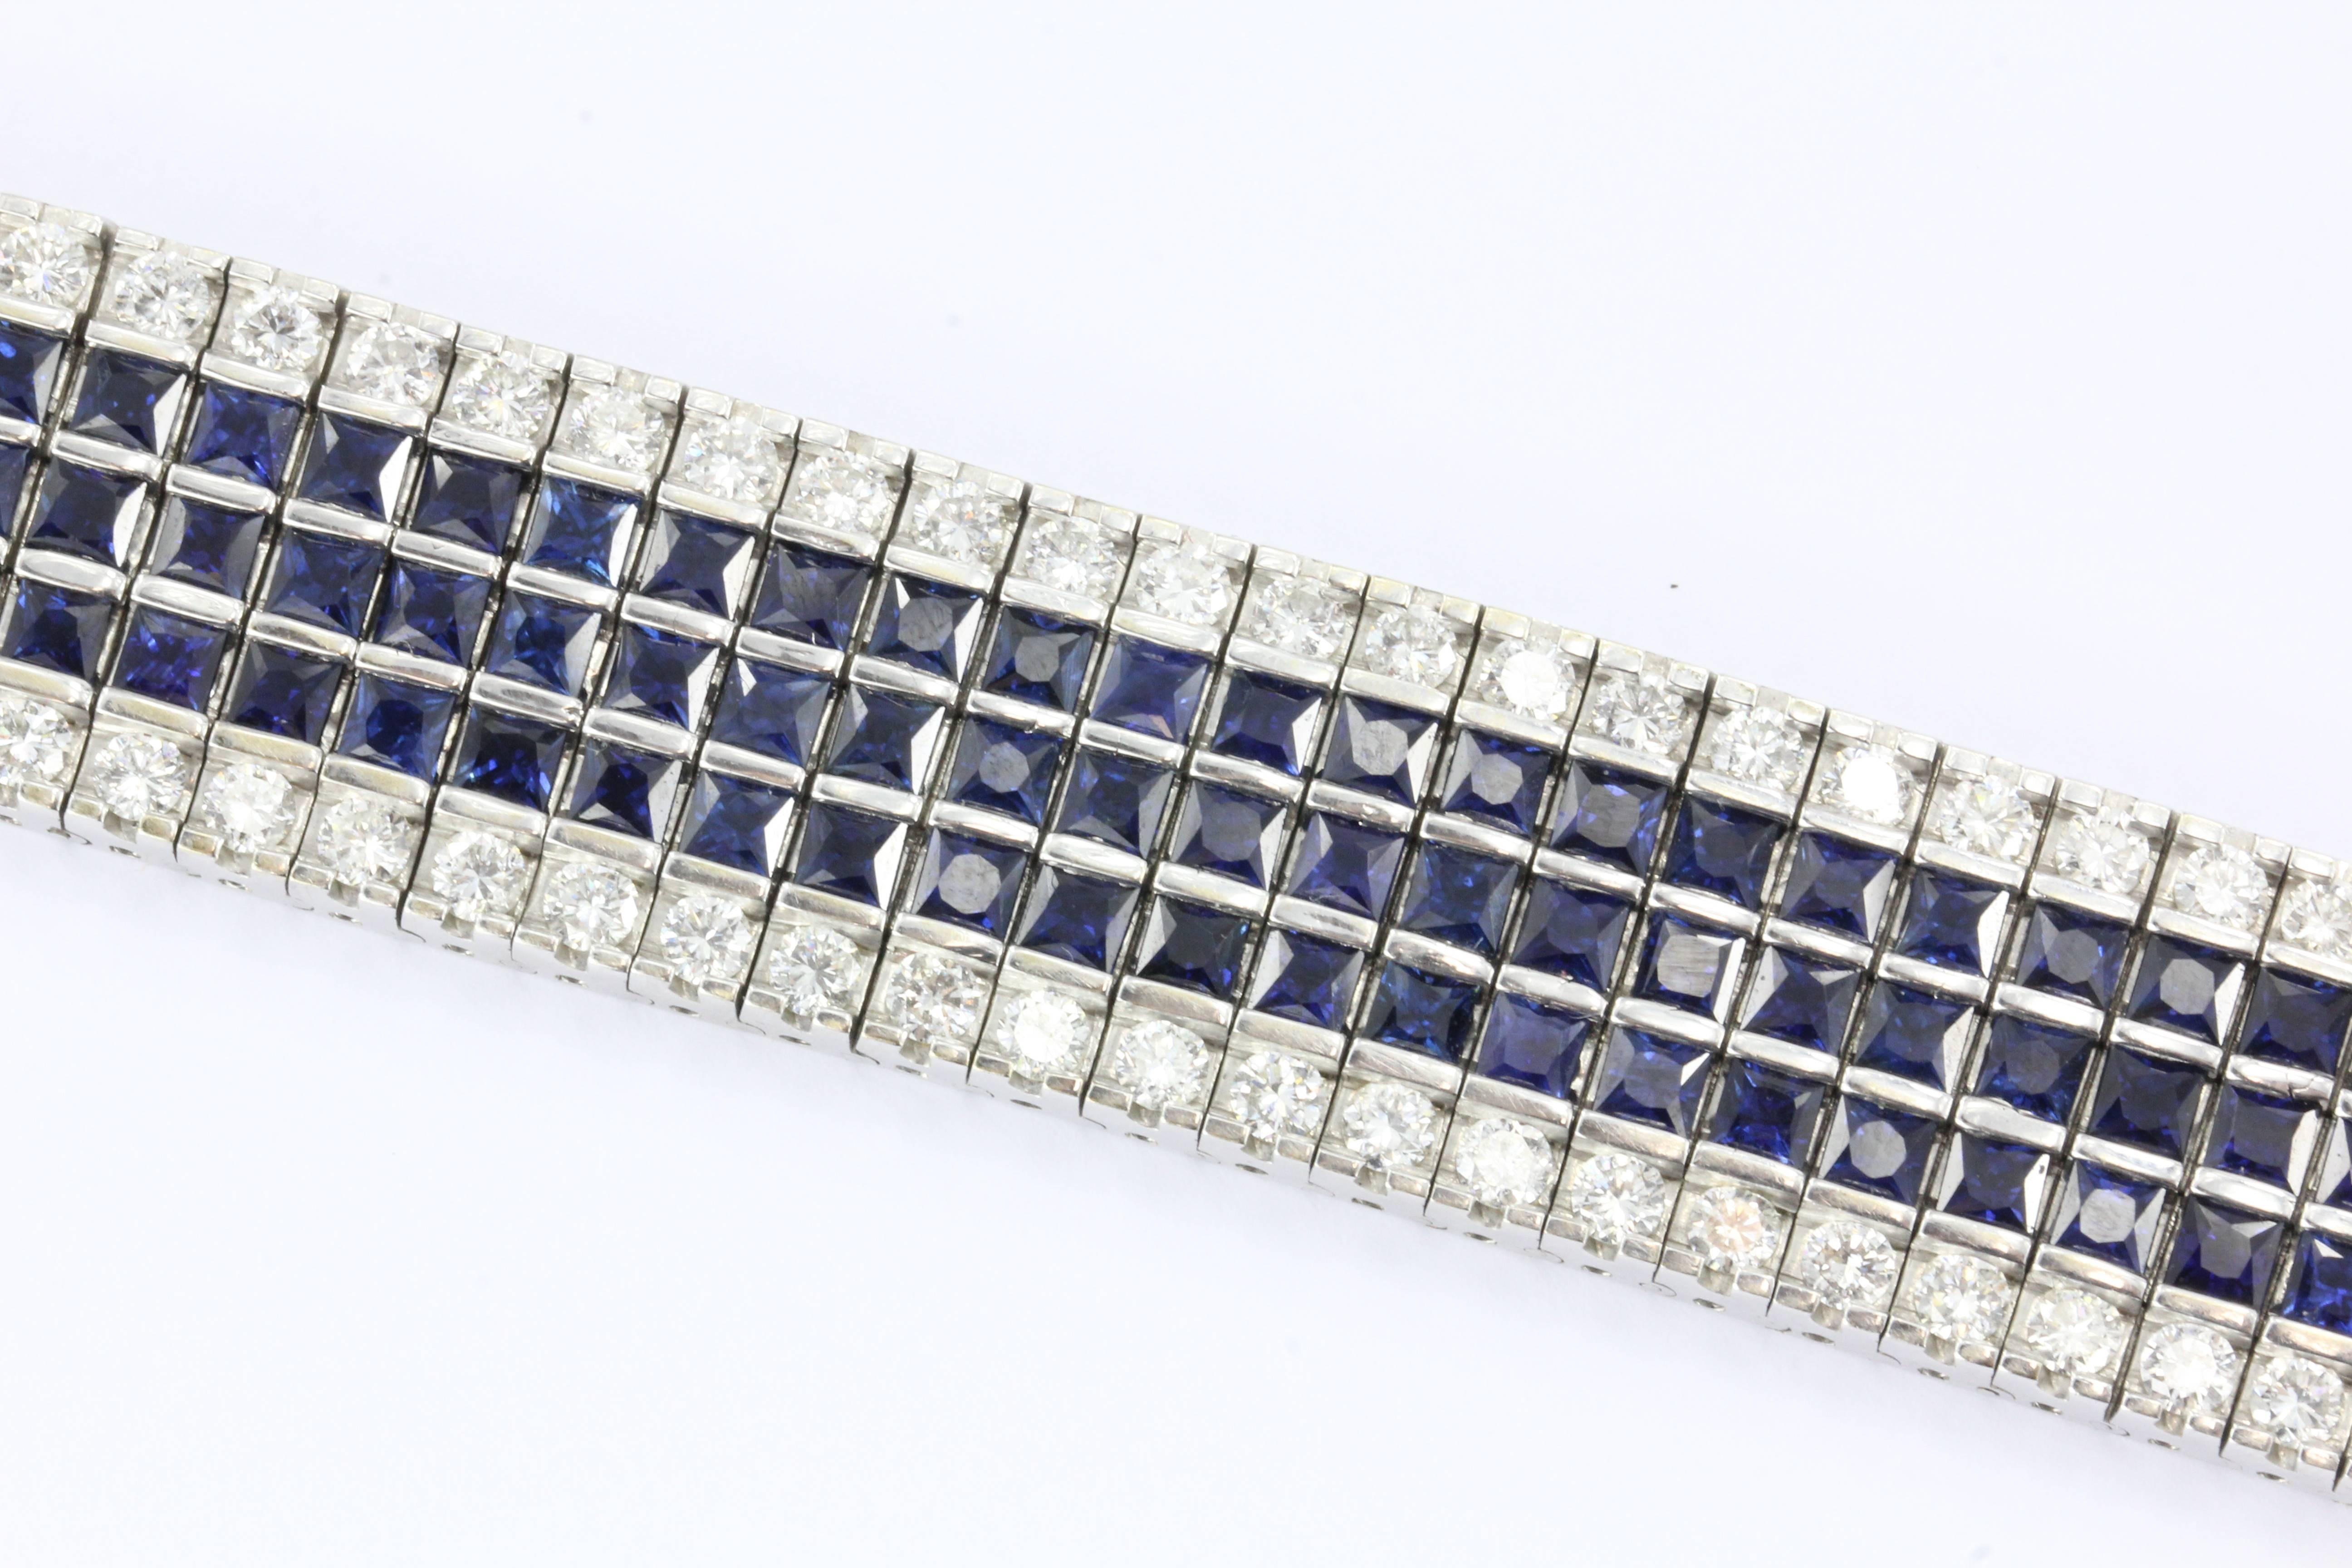 Women's White Gold Bracelet with 30 carats of diamonds and blue sapphires